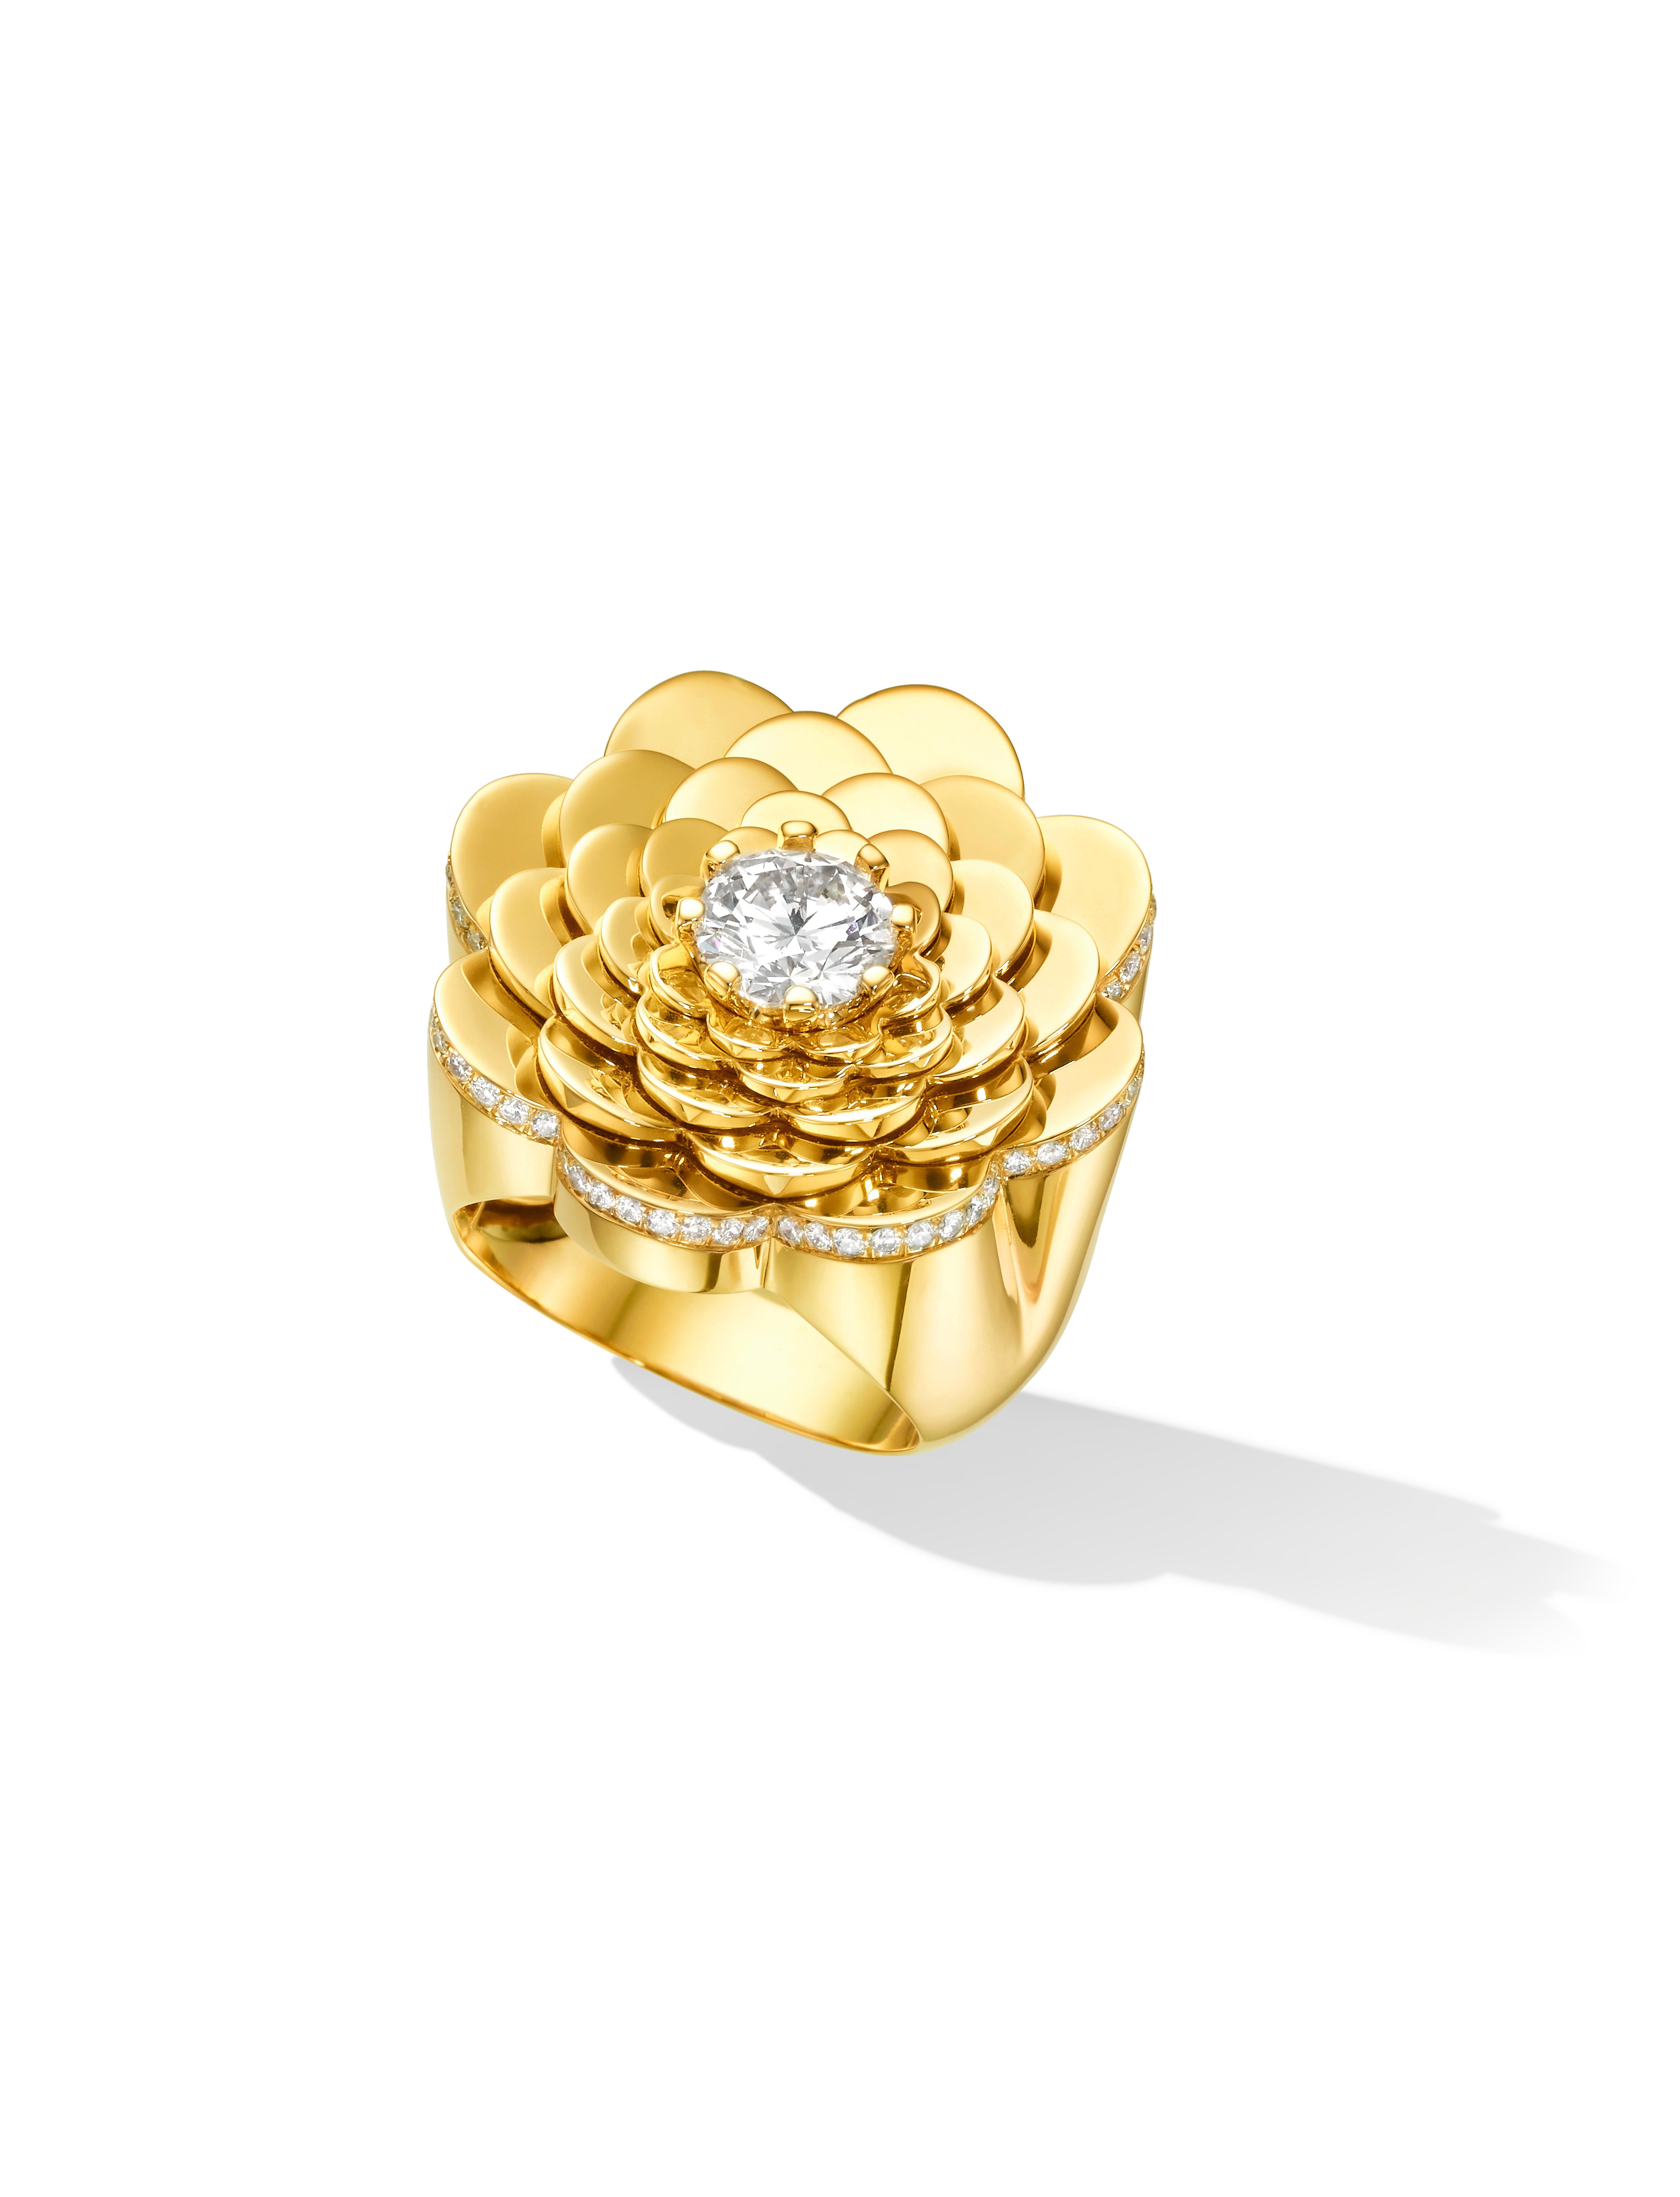 Round Cut CADAR Trio Cocktail Ring, 18K Yellow Gold and 1.75cttw White Diamond